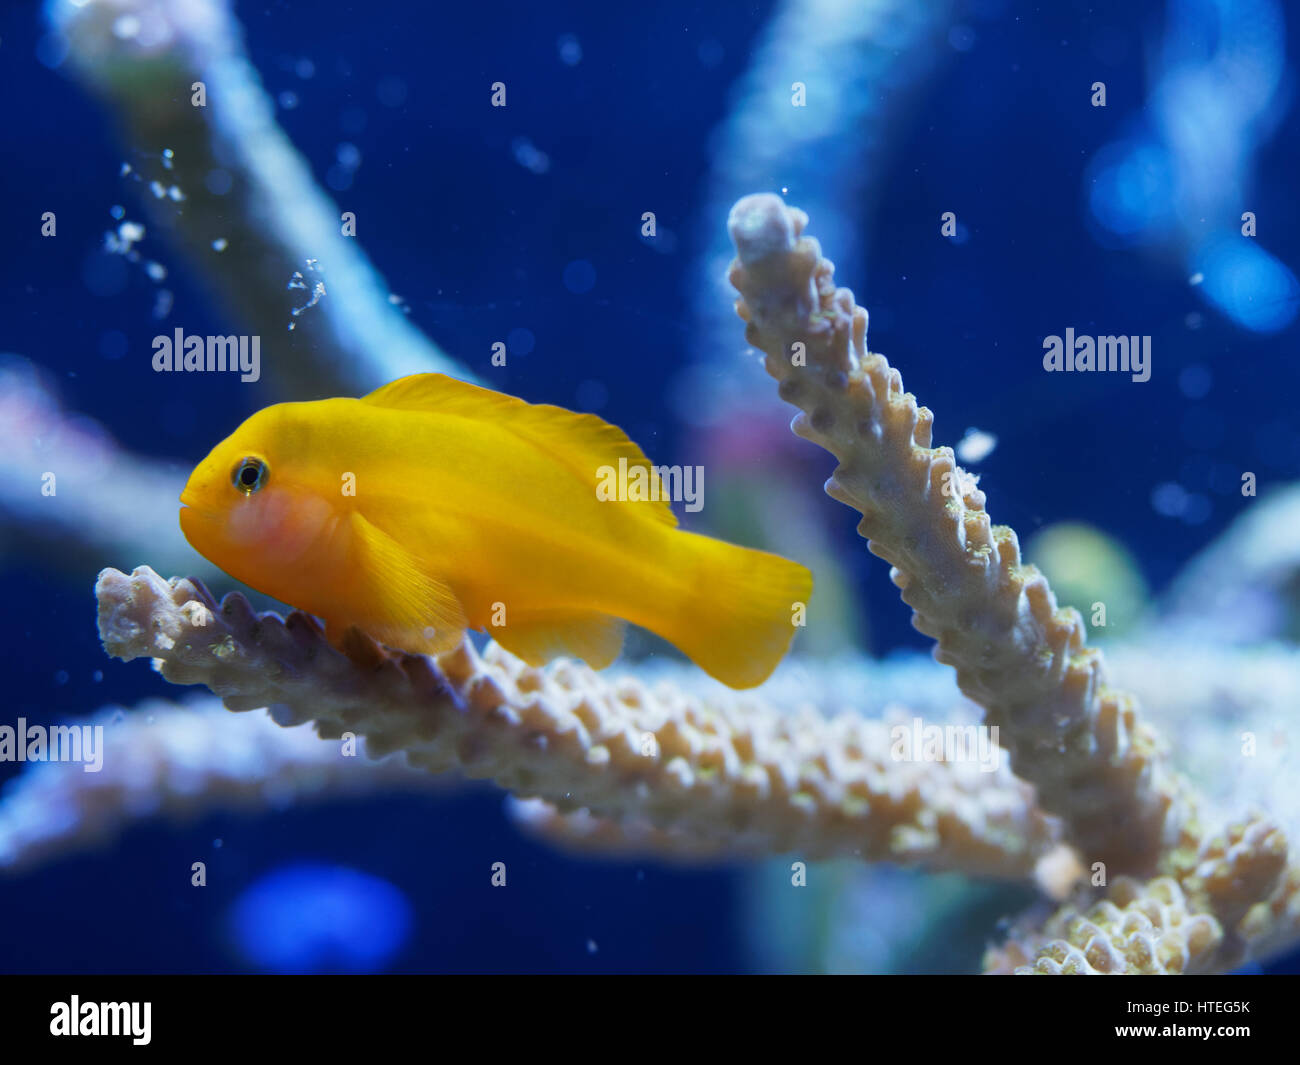 Close-up of a yellow clown goby (Gobiodon okinawae) in an aquarium Stock Photo